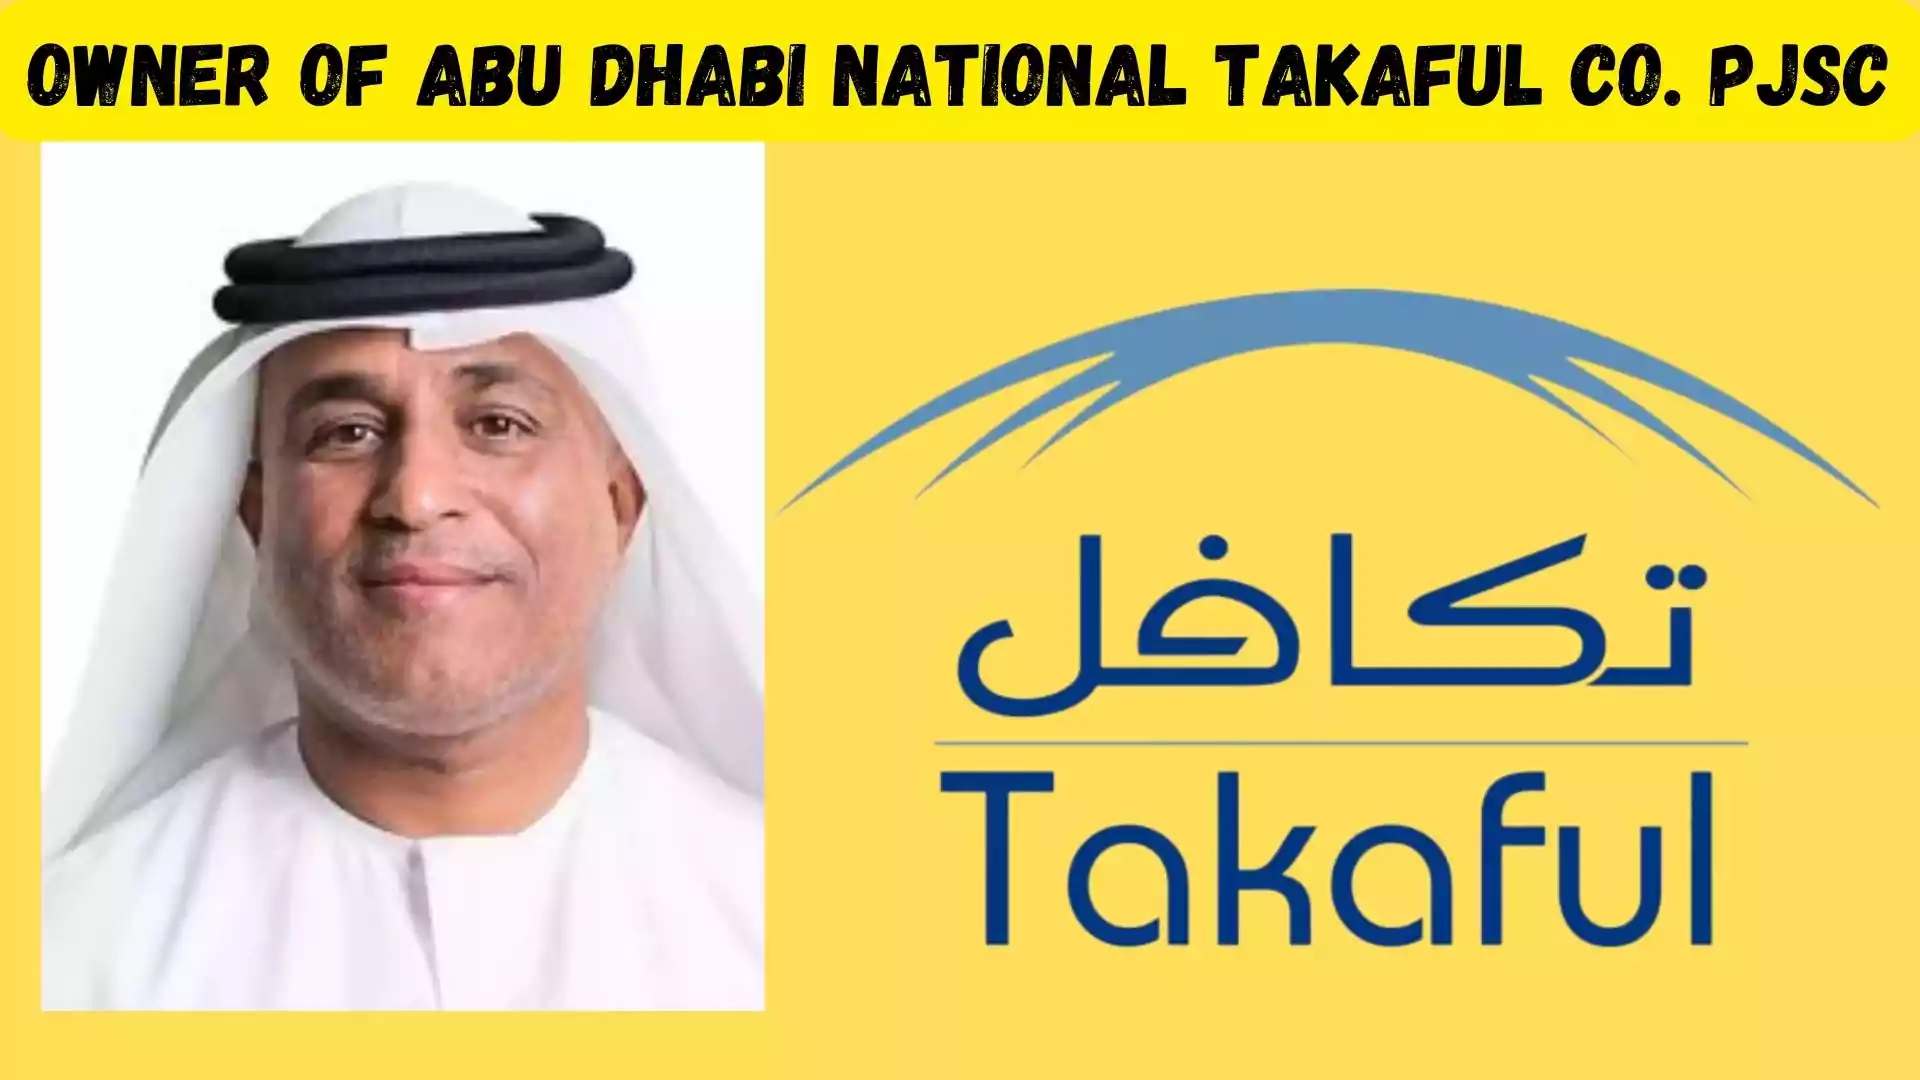 Who is the owner of Abu Dhabi National Takaful Co. PJSC | Wiki Chairman image with logo